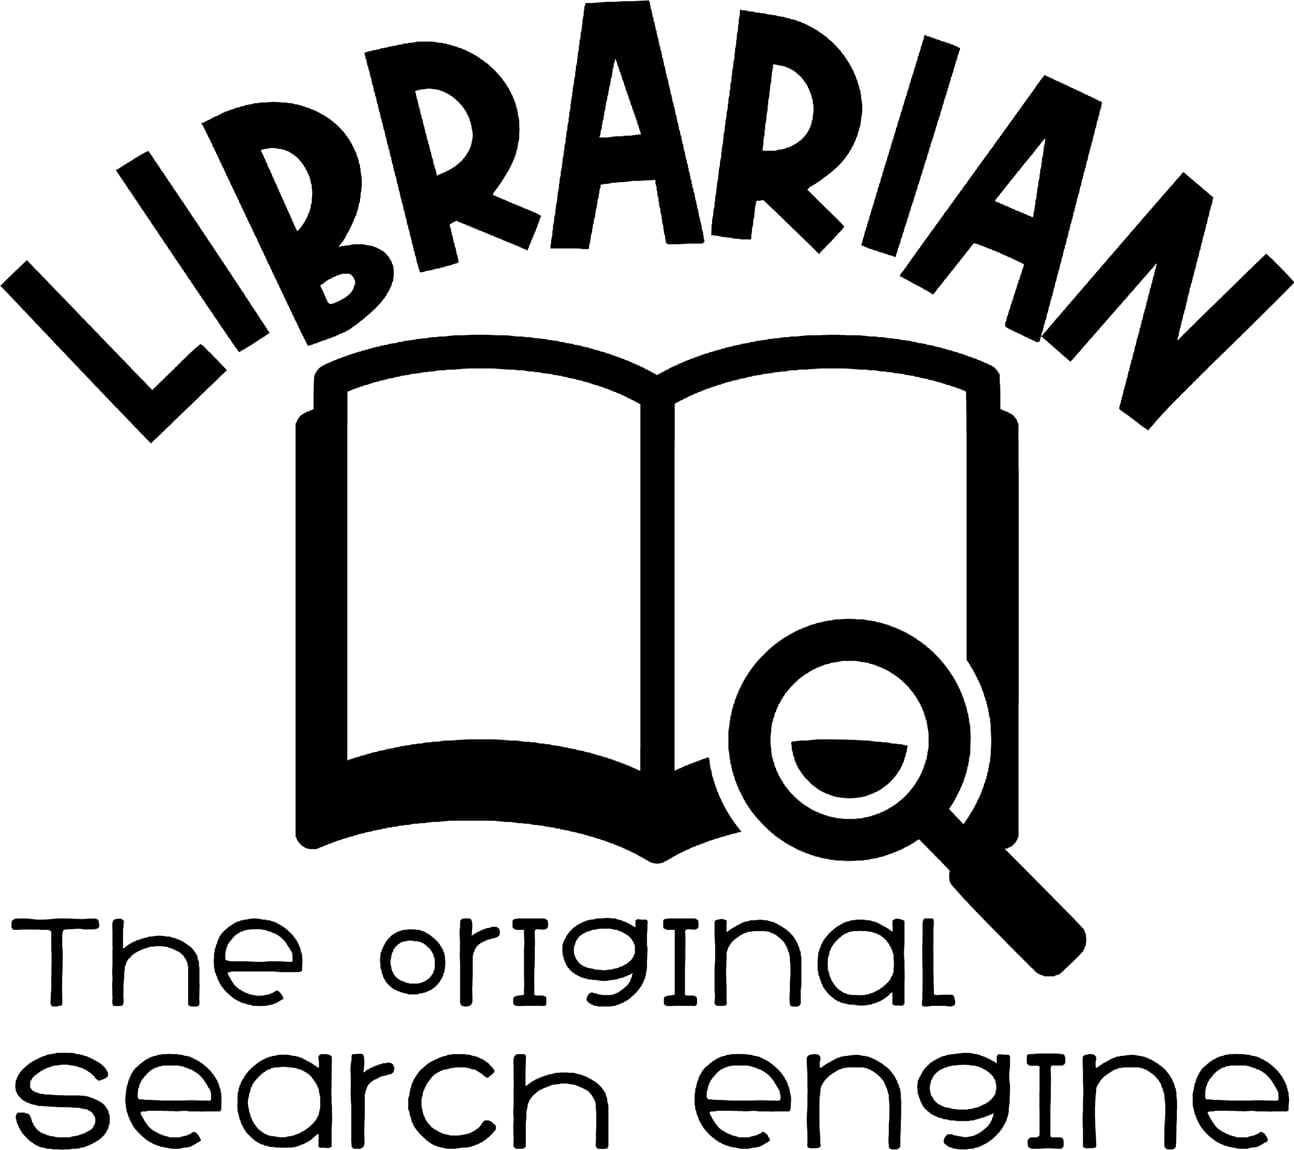 Librarian Original Search Engine Funny Humor Career Job Books l Wall Decals  for Walls Peel and Stick wall art murals Black Large 36 Inch 